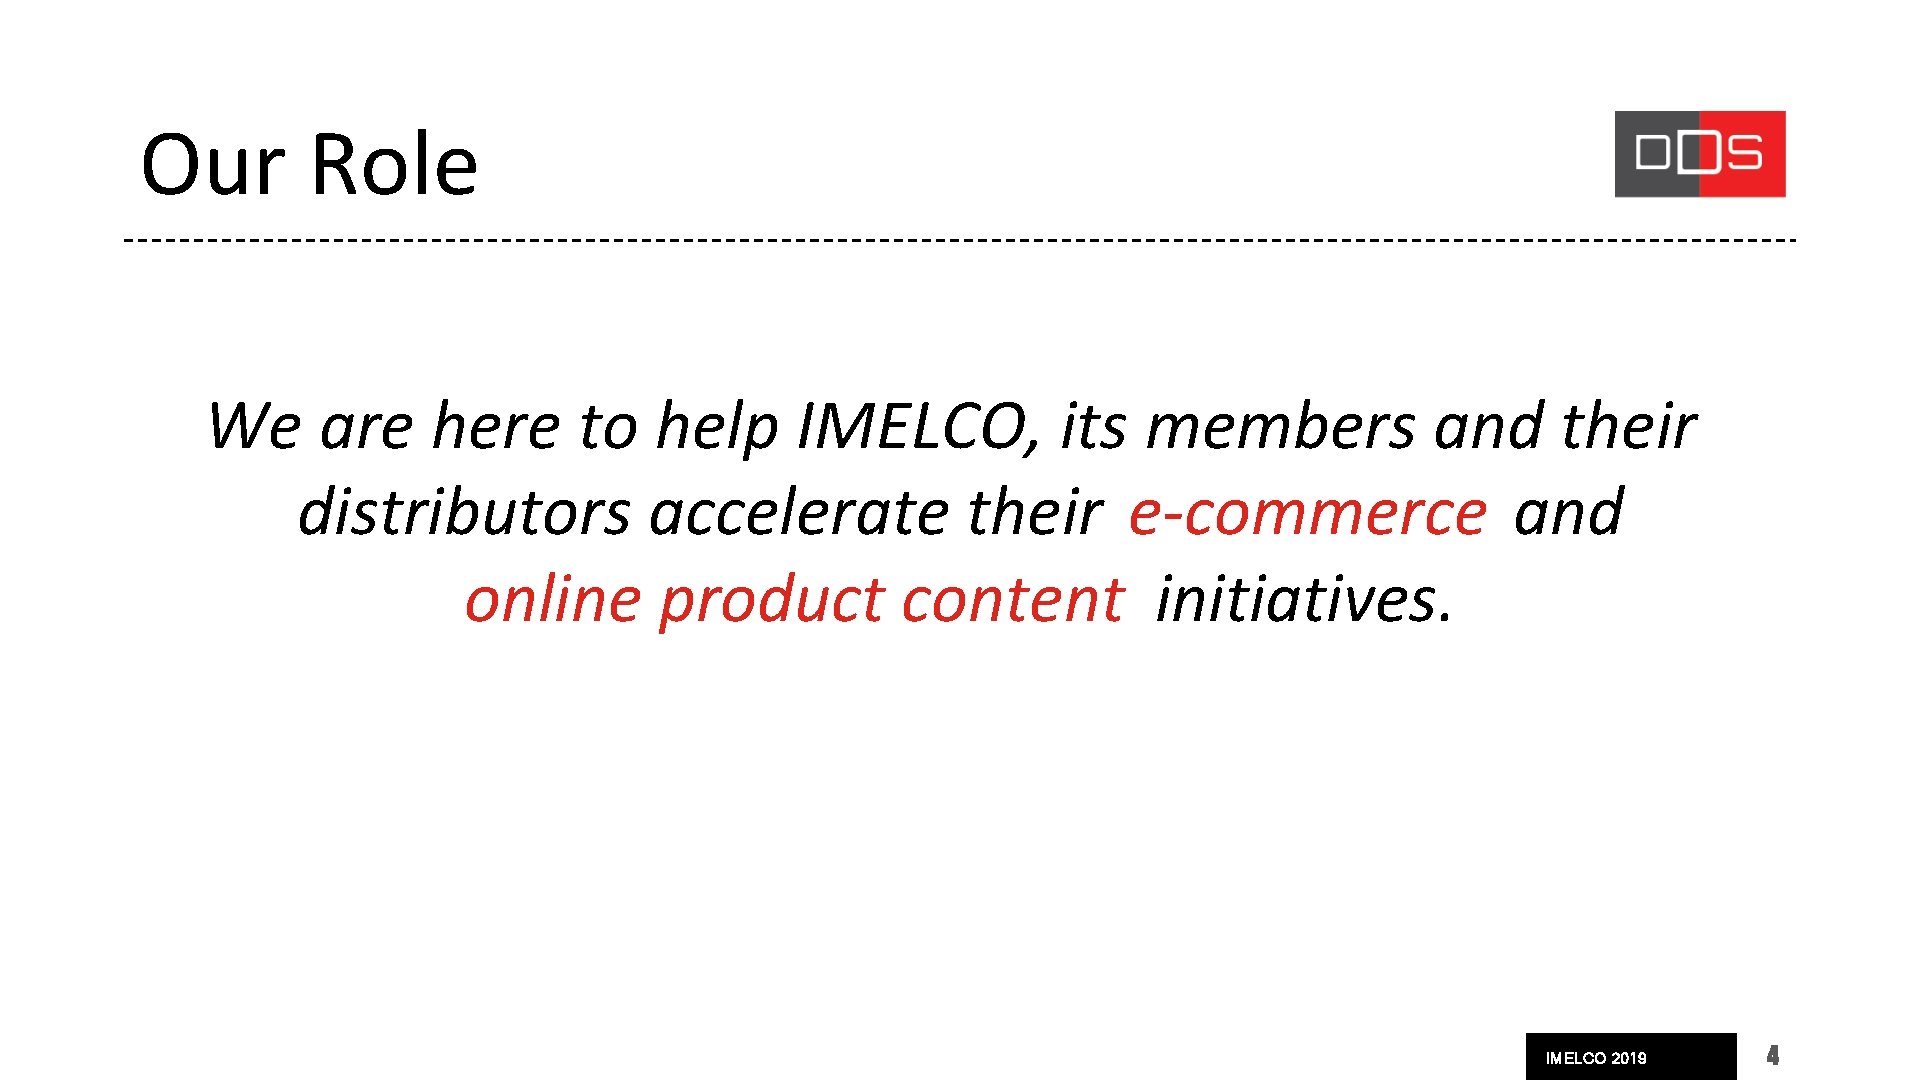 Our Role We are here to help IMELCO, its members and their distributors accelerate